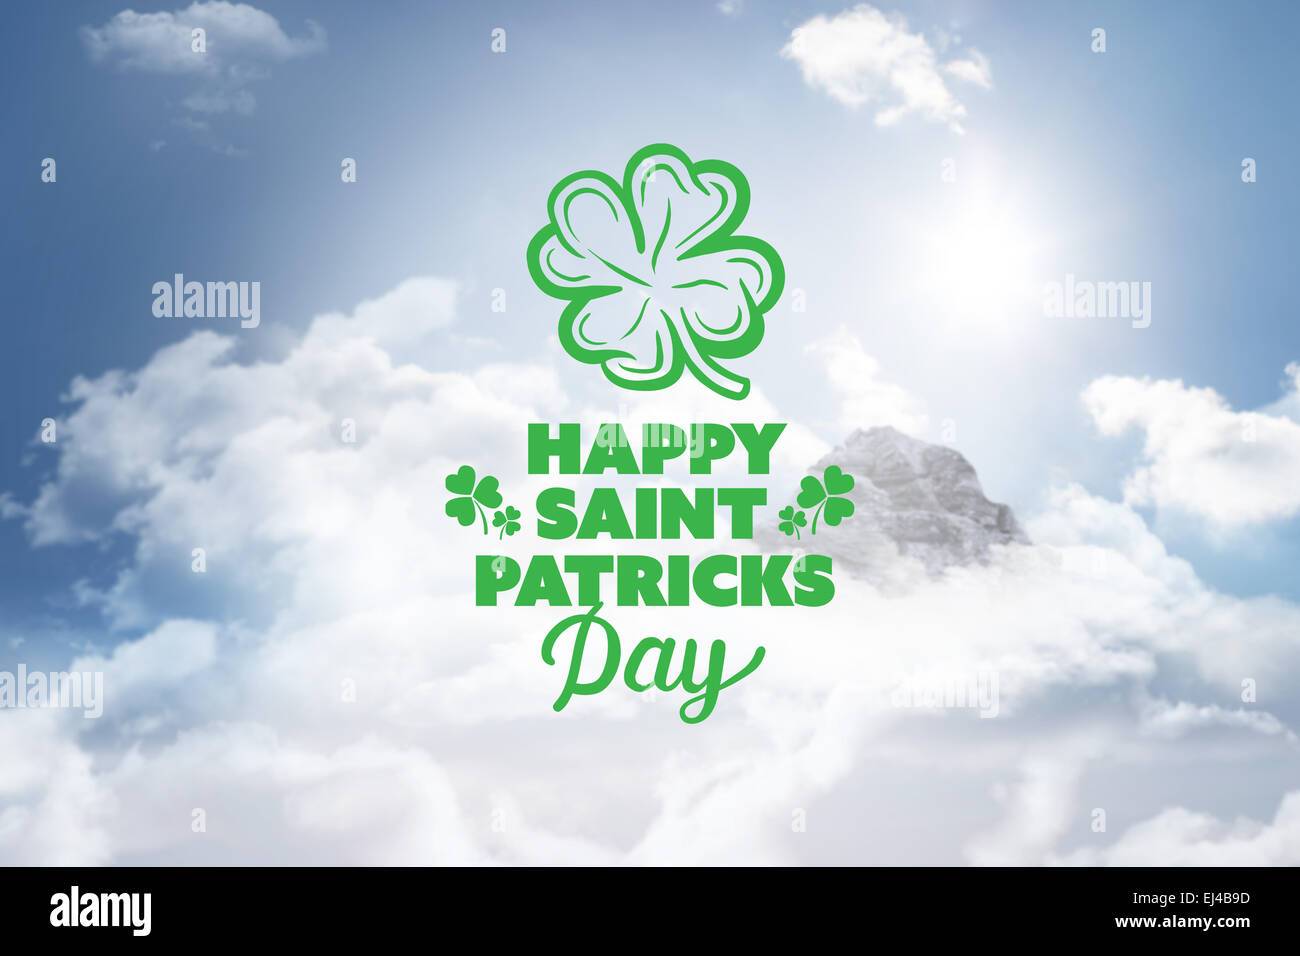 Composite image of patricks day greeting Stock Photo